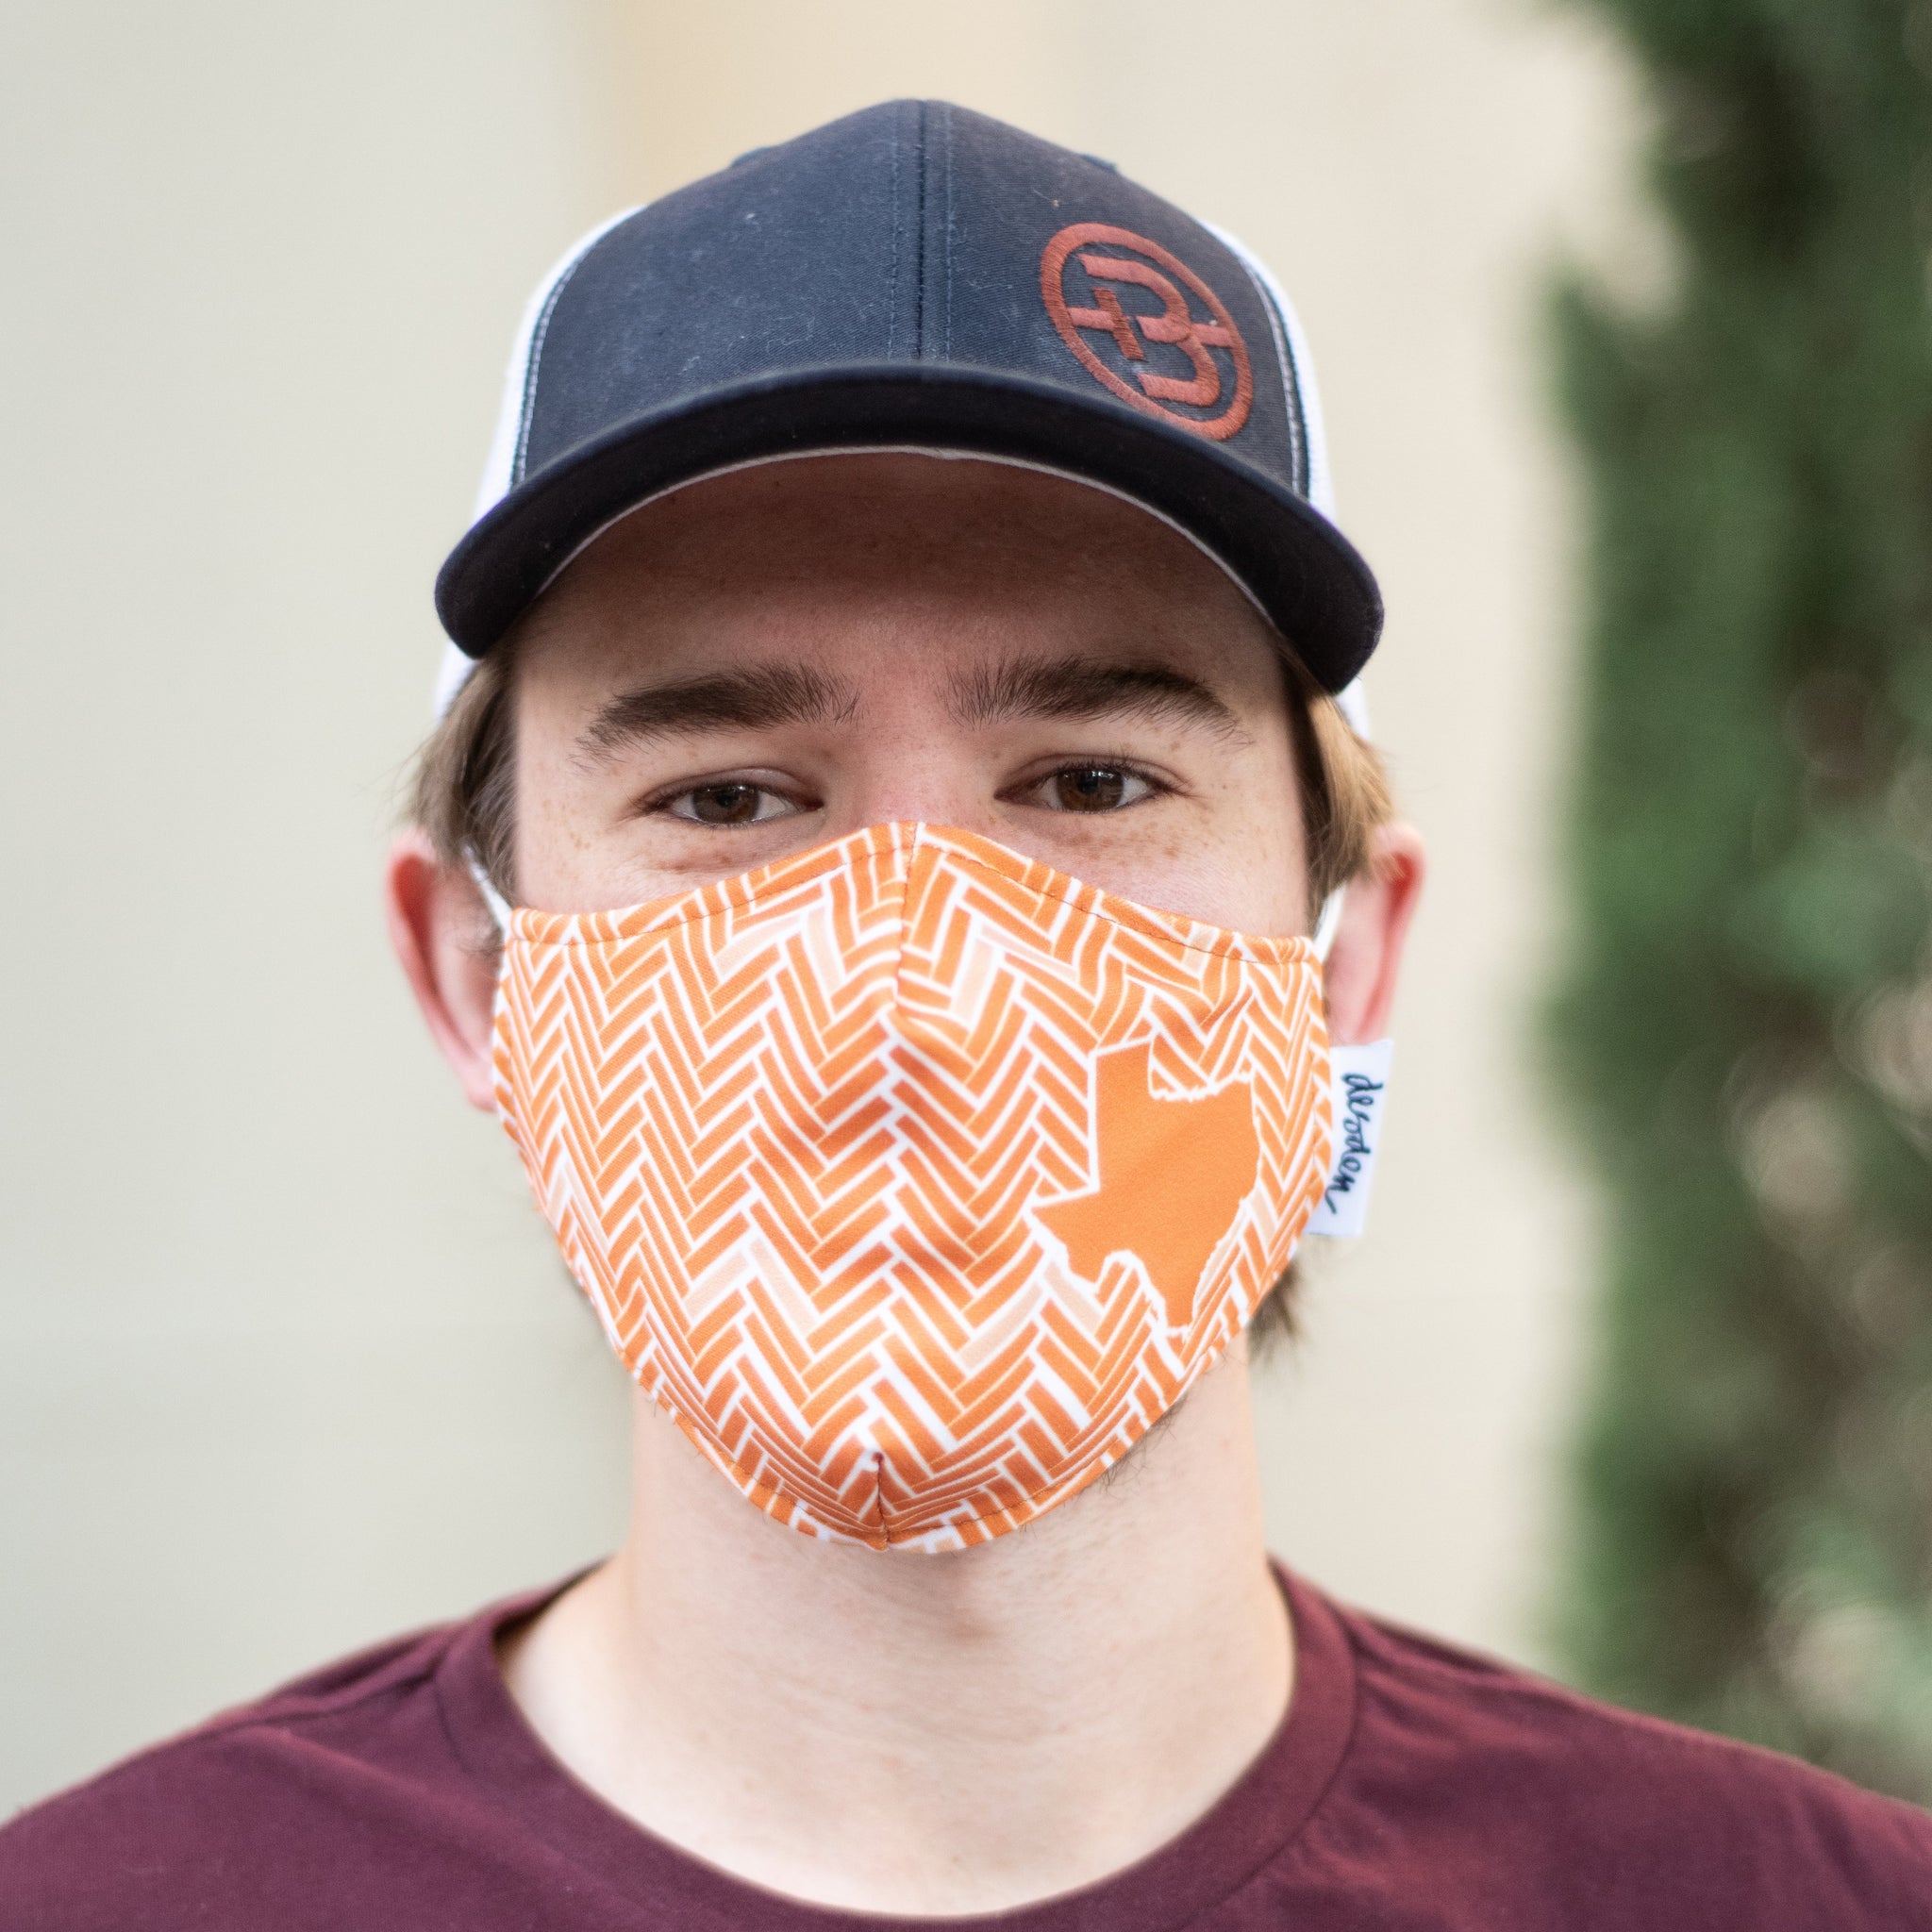 State of Texas Licensed Collegiate Face Mask